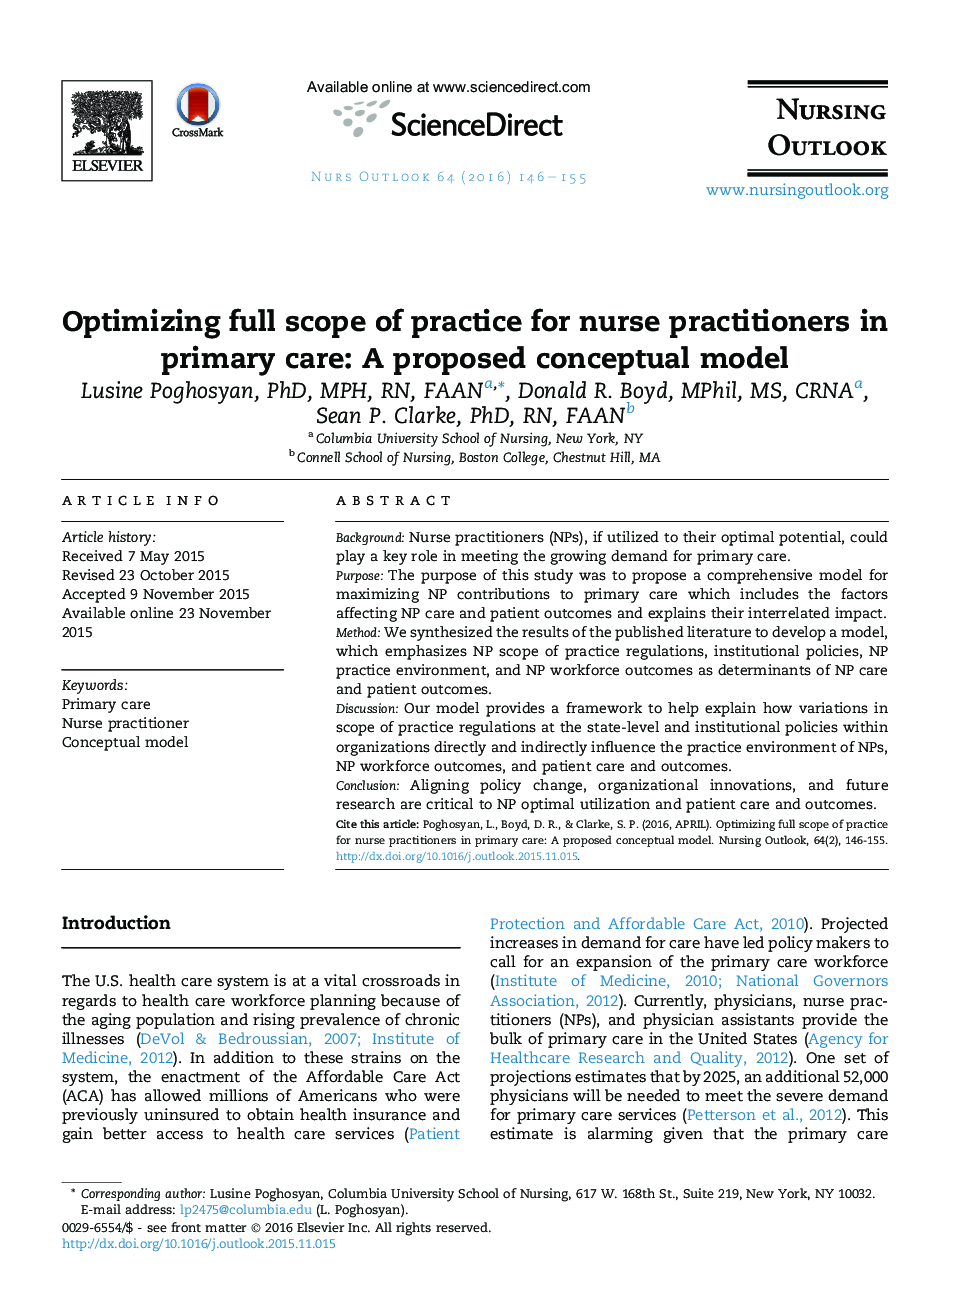 ArticlePracticeOptimizing full scope of practice for nurse practitioners in primary care: A proposed conceptual model